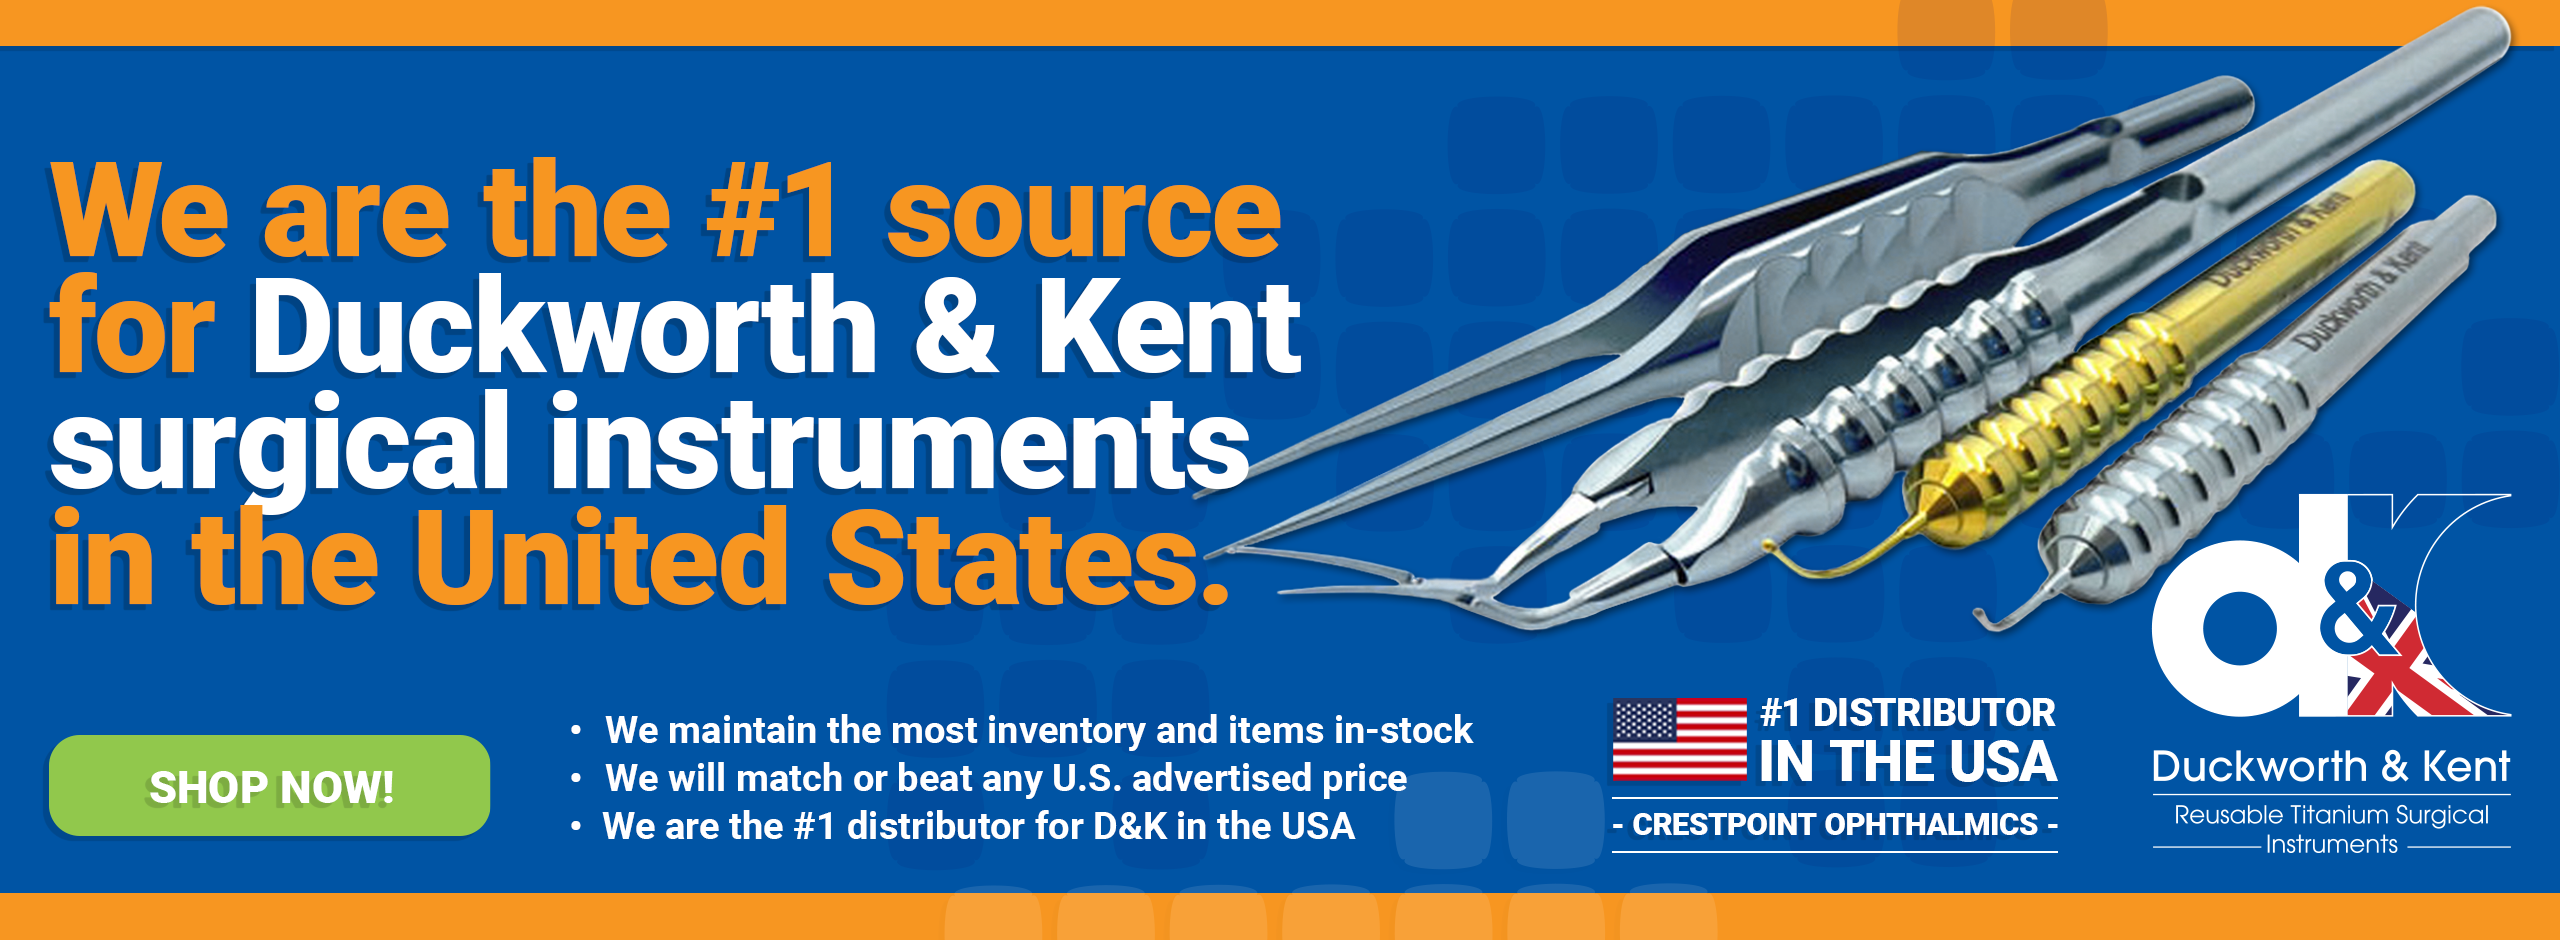 Crestpoint Ophthalmics is the #1source for Duckworth and Kent surgical instruments in the United States